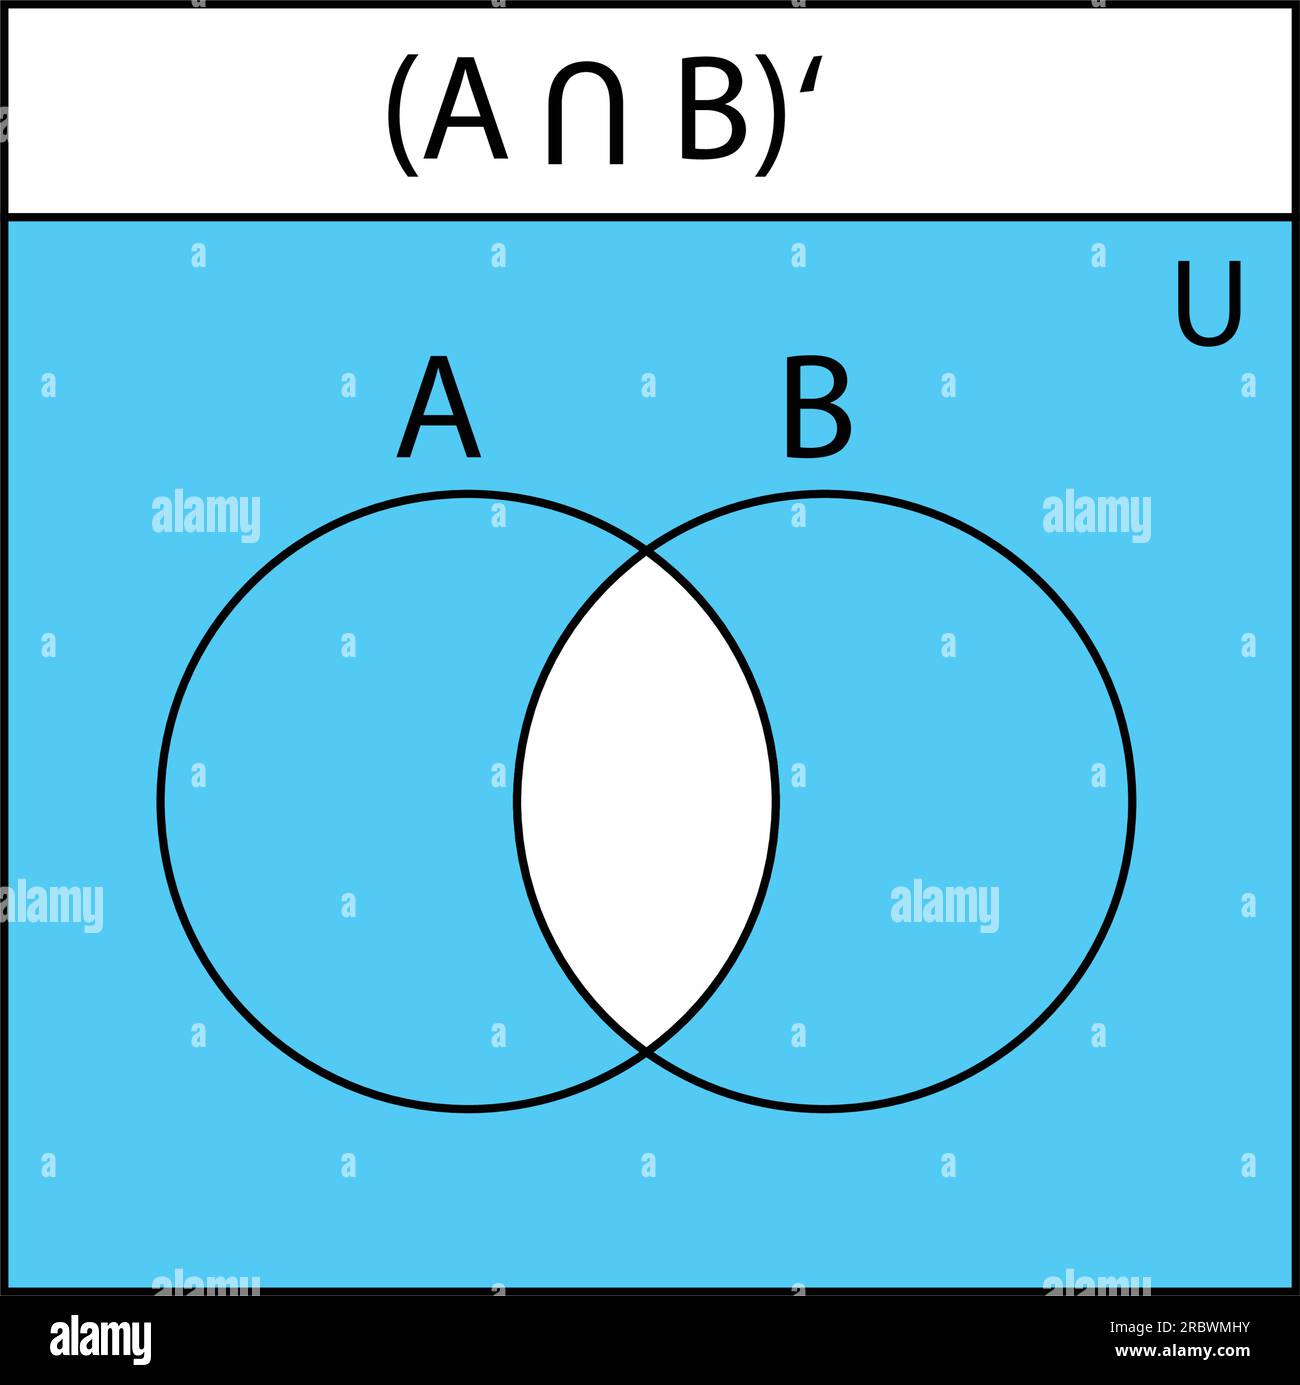 Venn diagram. Set of outline  Venn diagrams with A,  B, and overlapped circles. statistic charts, presentations, and infographic layouts. Stock Vector